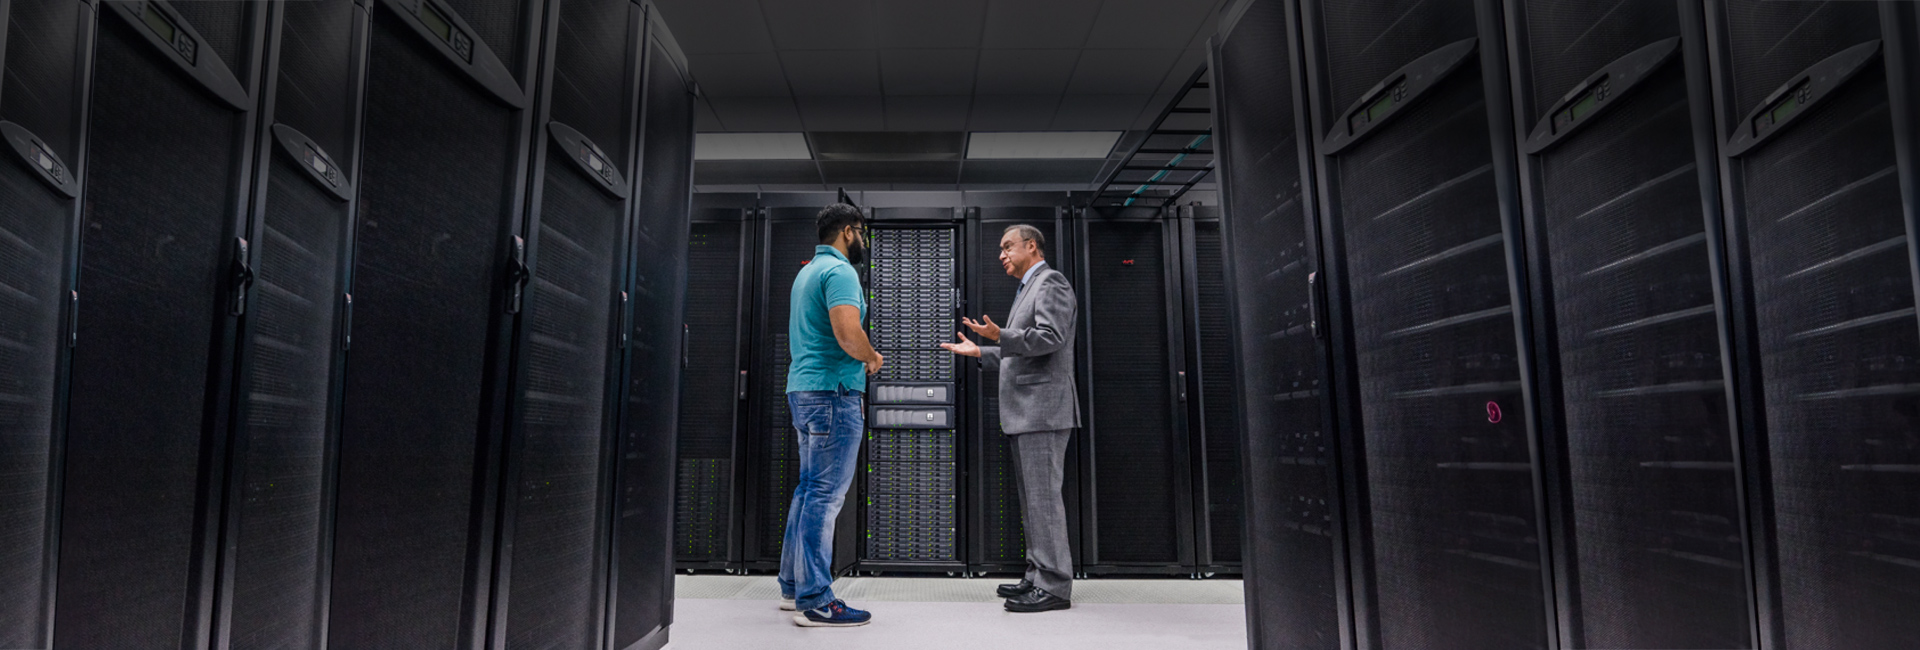 Two men talking in a server room. The man on the left is wearing a teal polo and blue jeans. The man on the right is wearing a gray suit.